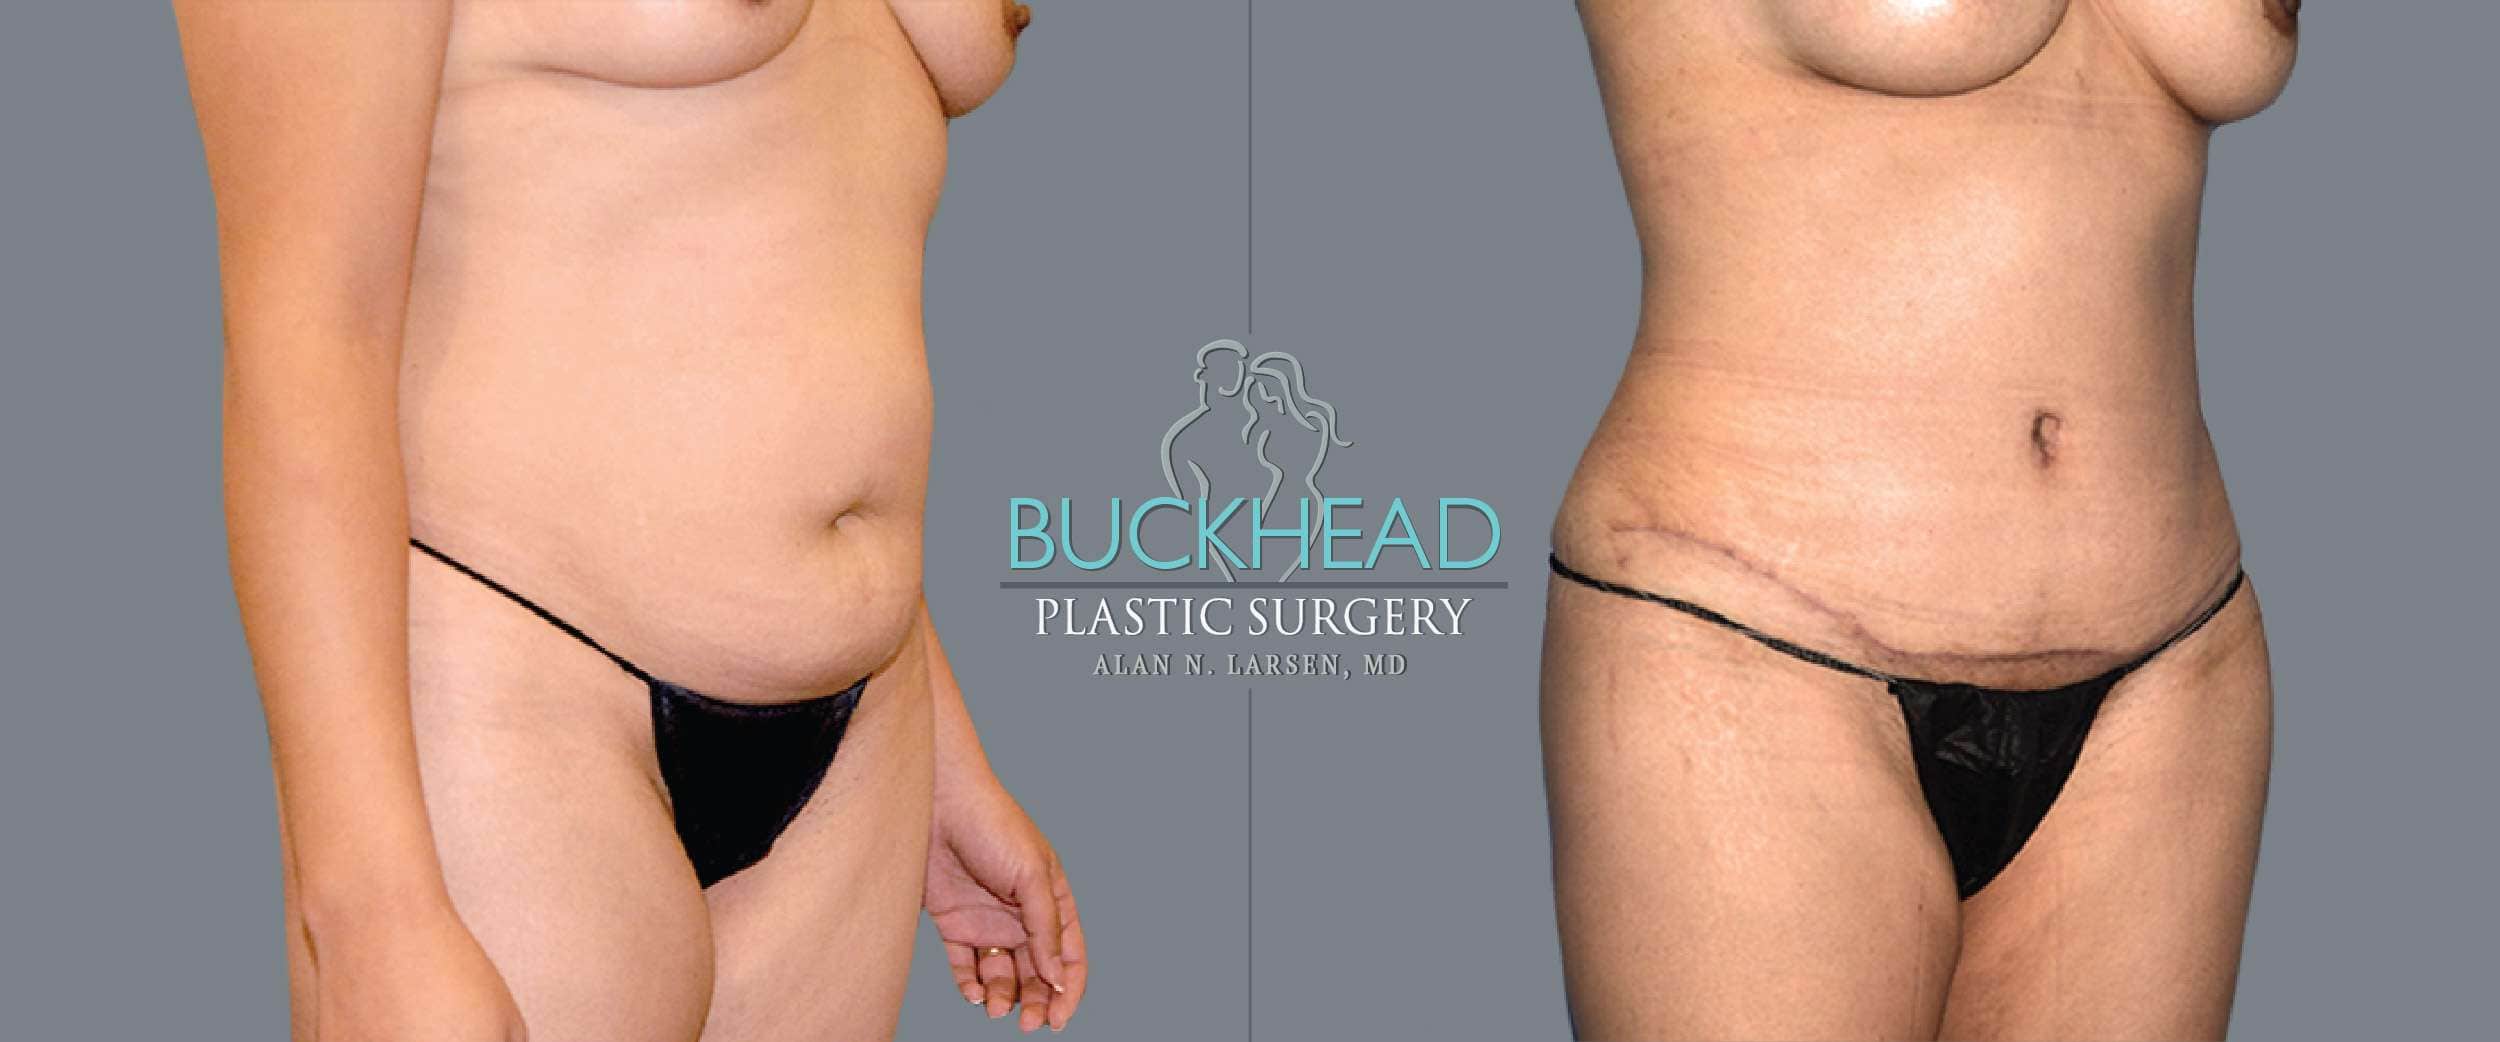 Before and After Photo gallery | Tummy Tuck | Buckhead Plastic Surgery | Board-Certified Plastic Surgeon in Atlanta GA